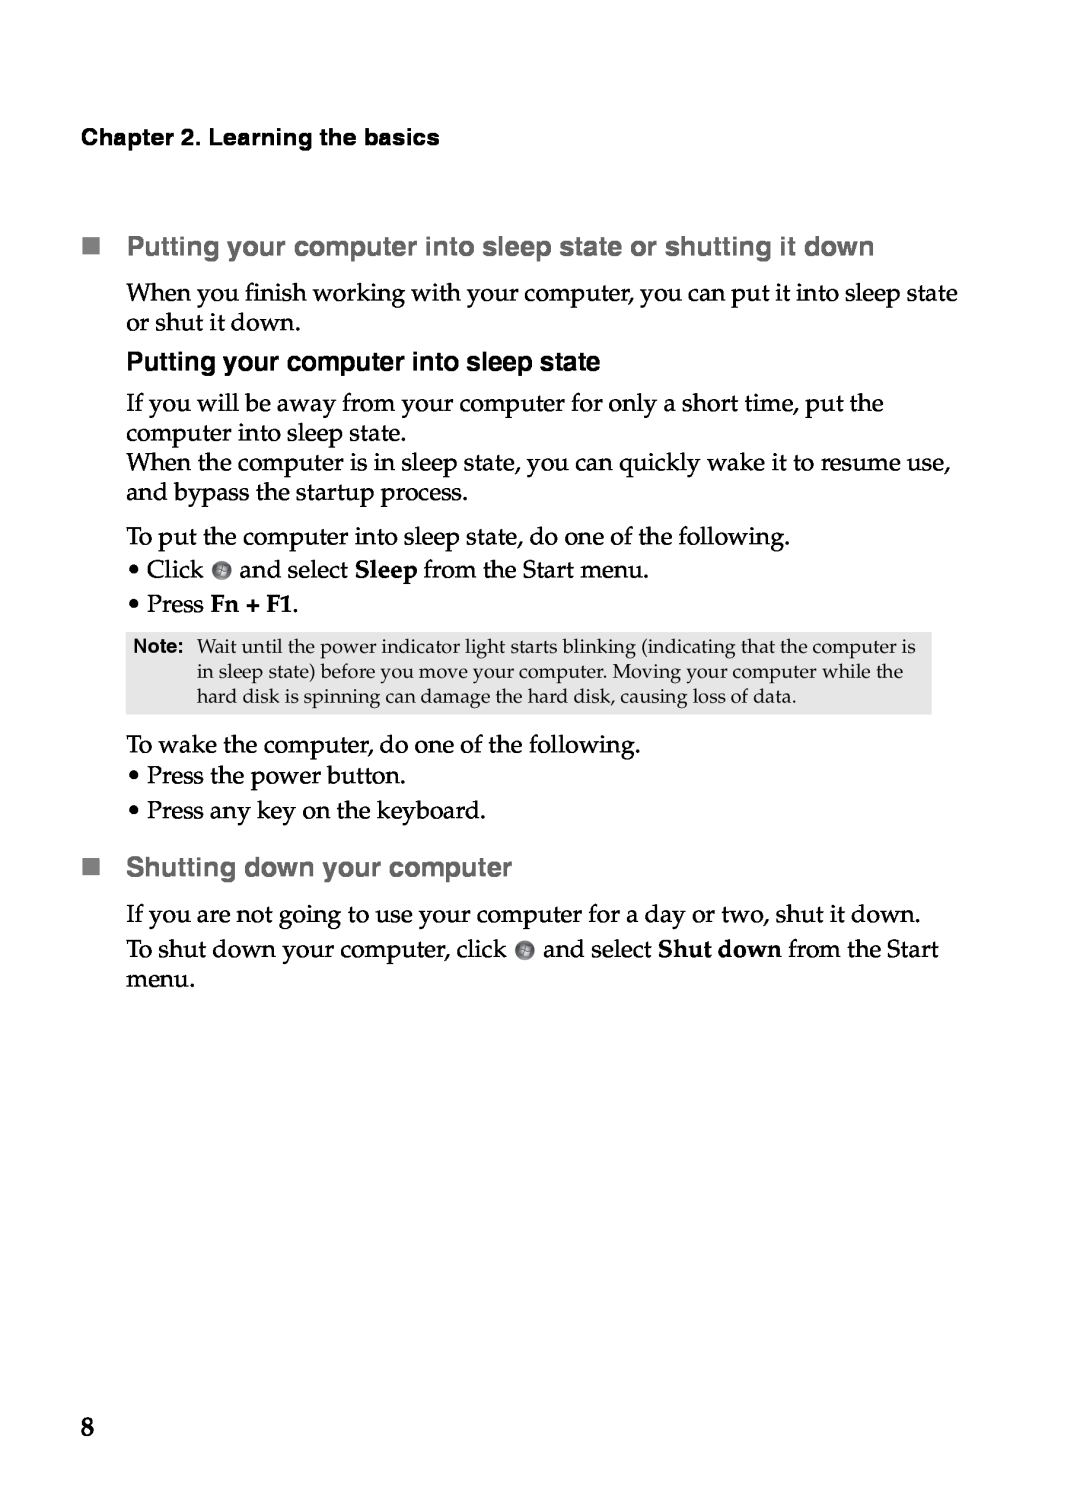 Lenovo S110 manual „Shutting down your computer, Putting your computer into sleep state, Learning the basics 